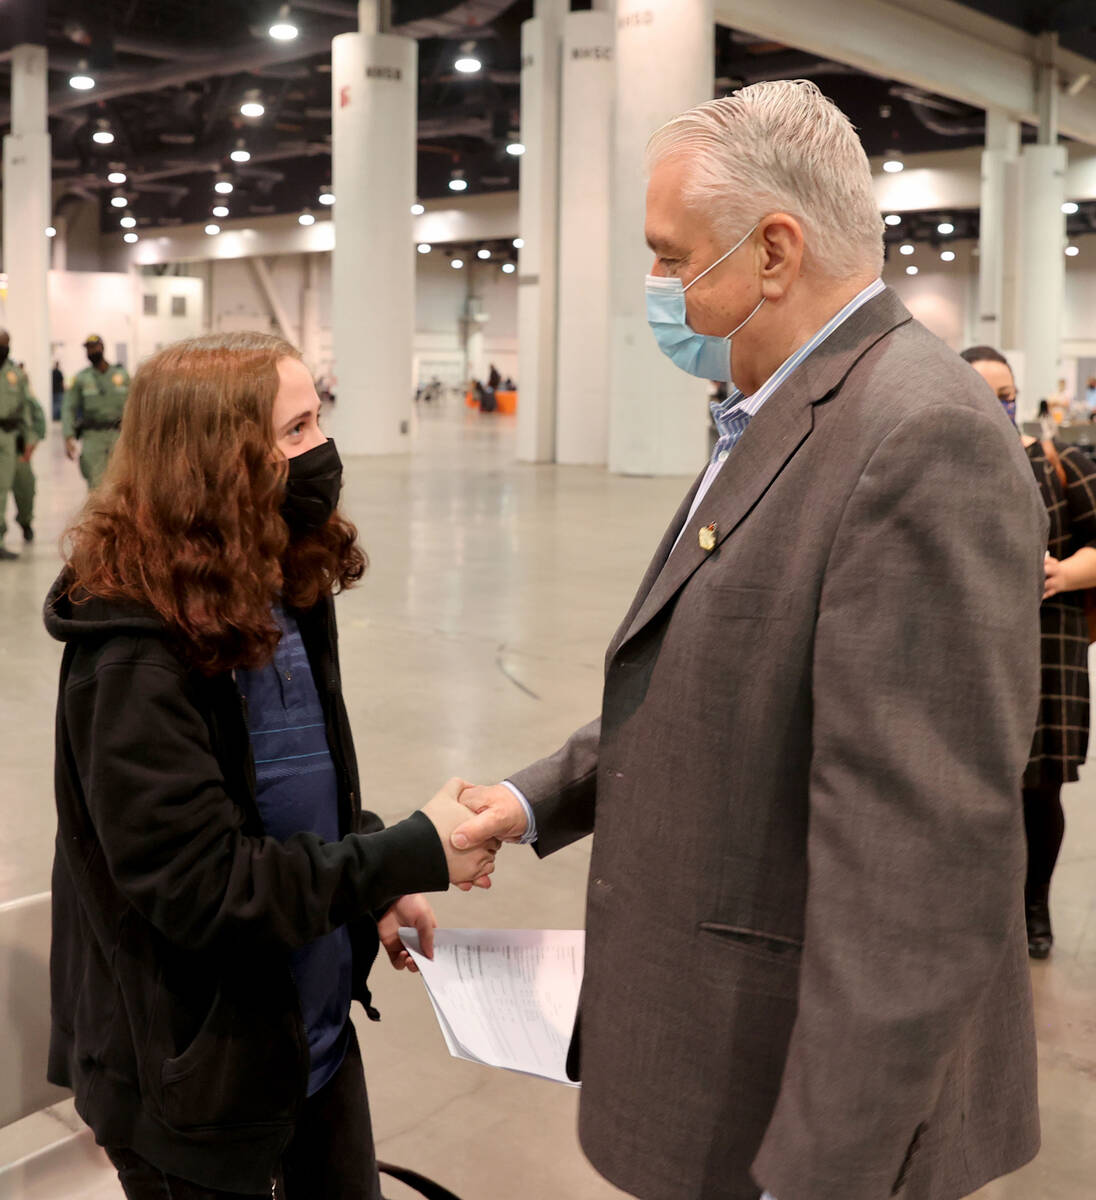 Lillian Prince, 18, of Las Vegas is congratulated on her job offer by Gov. Steve Sisolak during ...